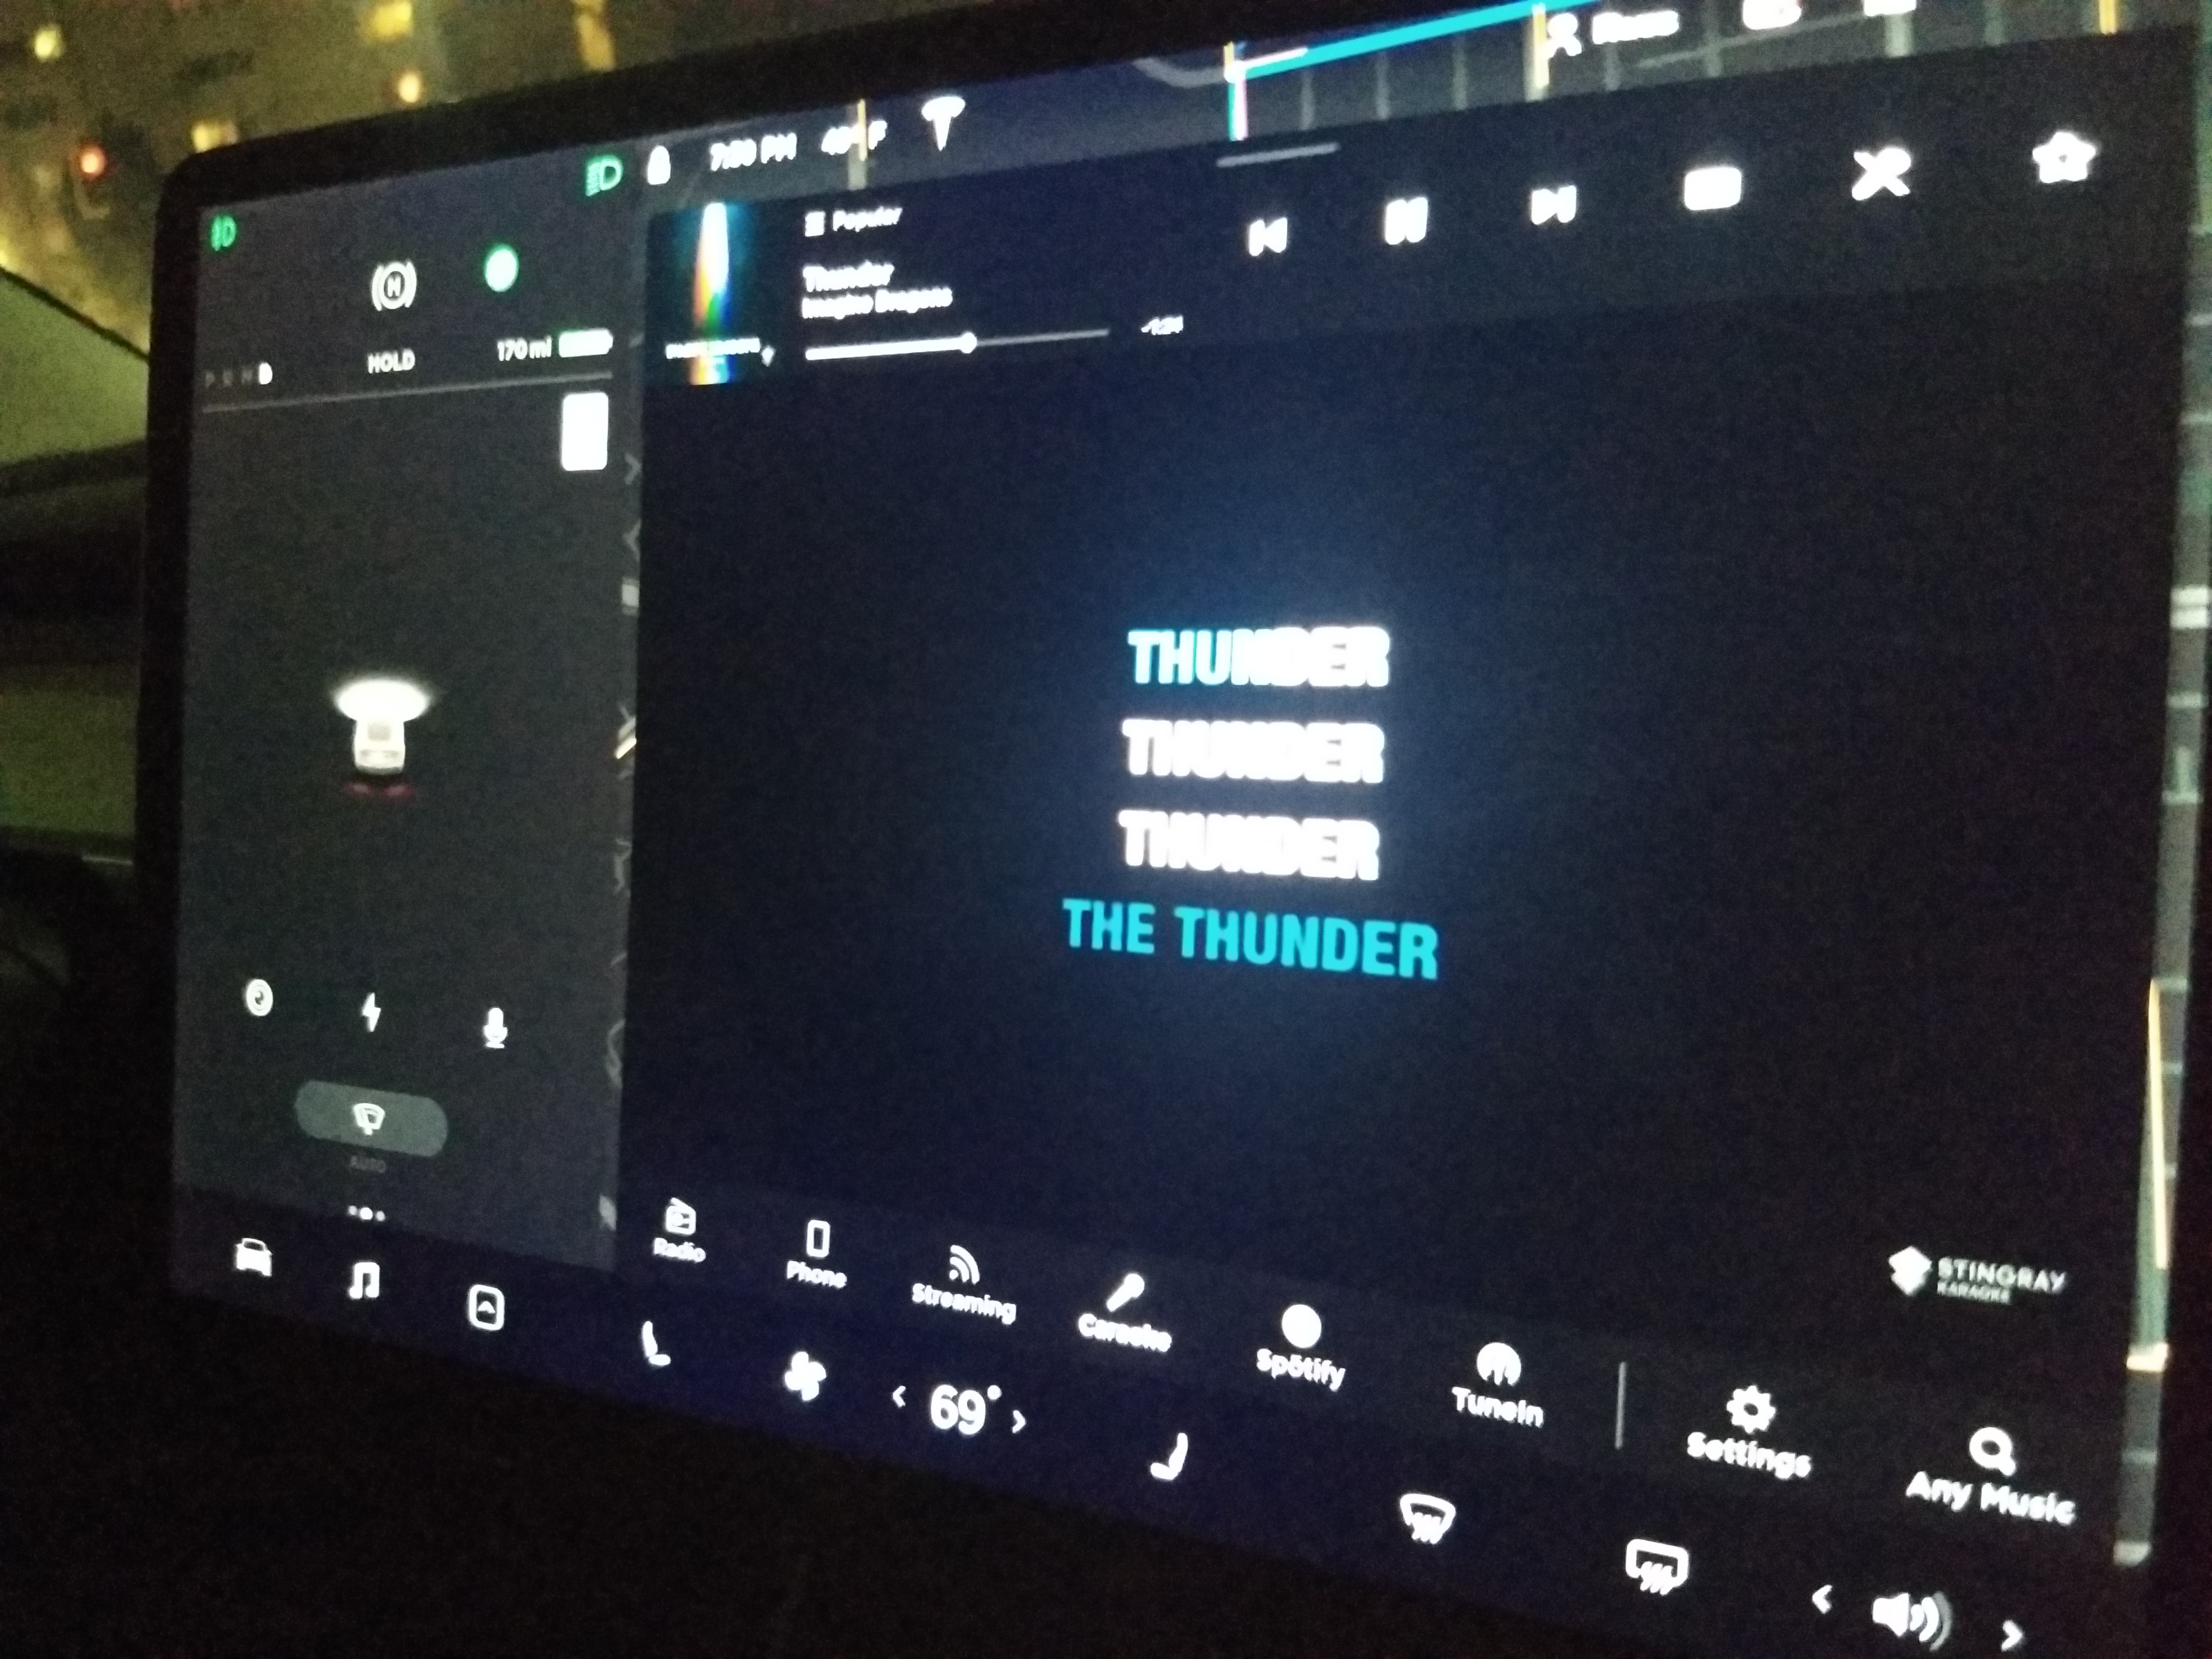 Tesla console running Caraoke: "Thunder" by Imagine Dragons